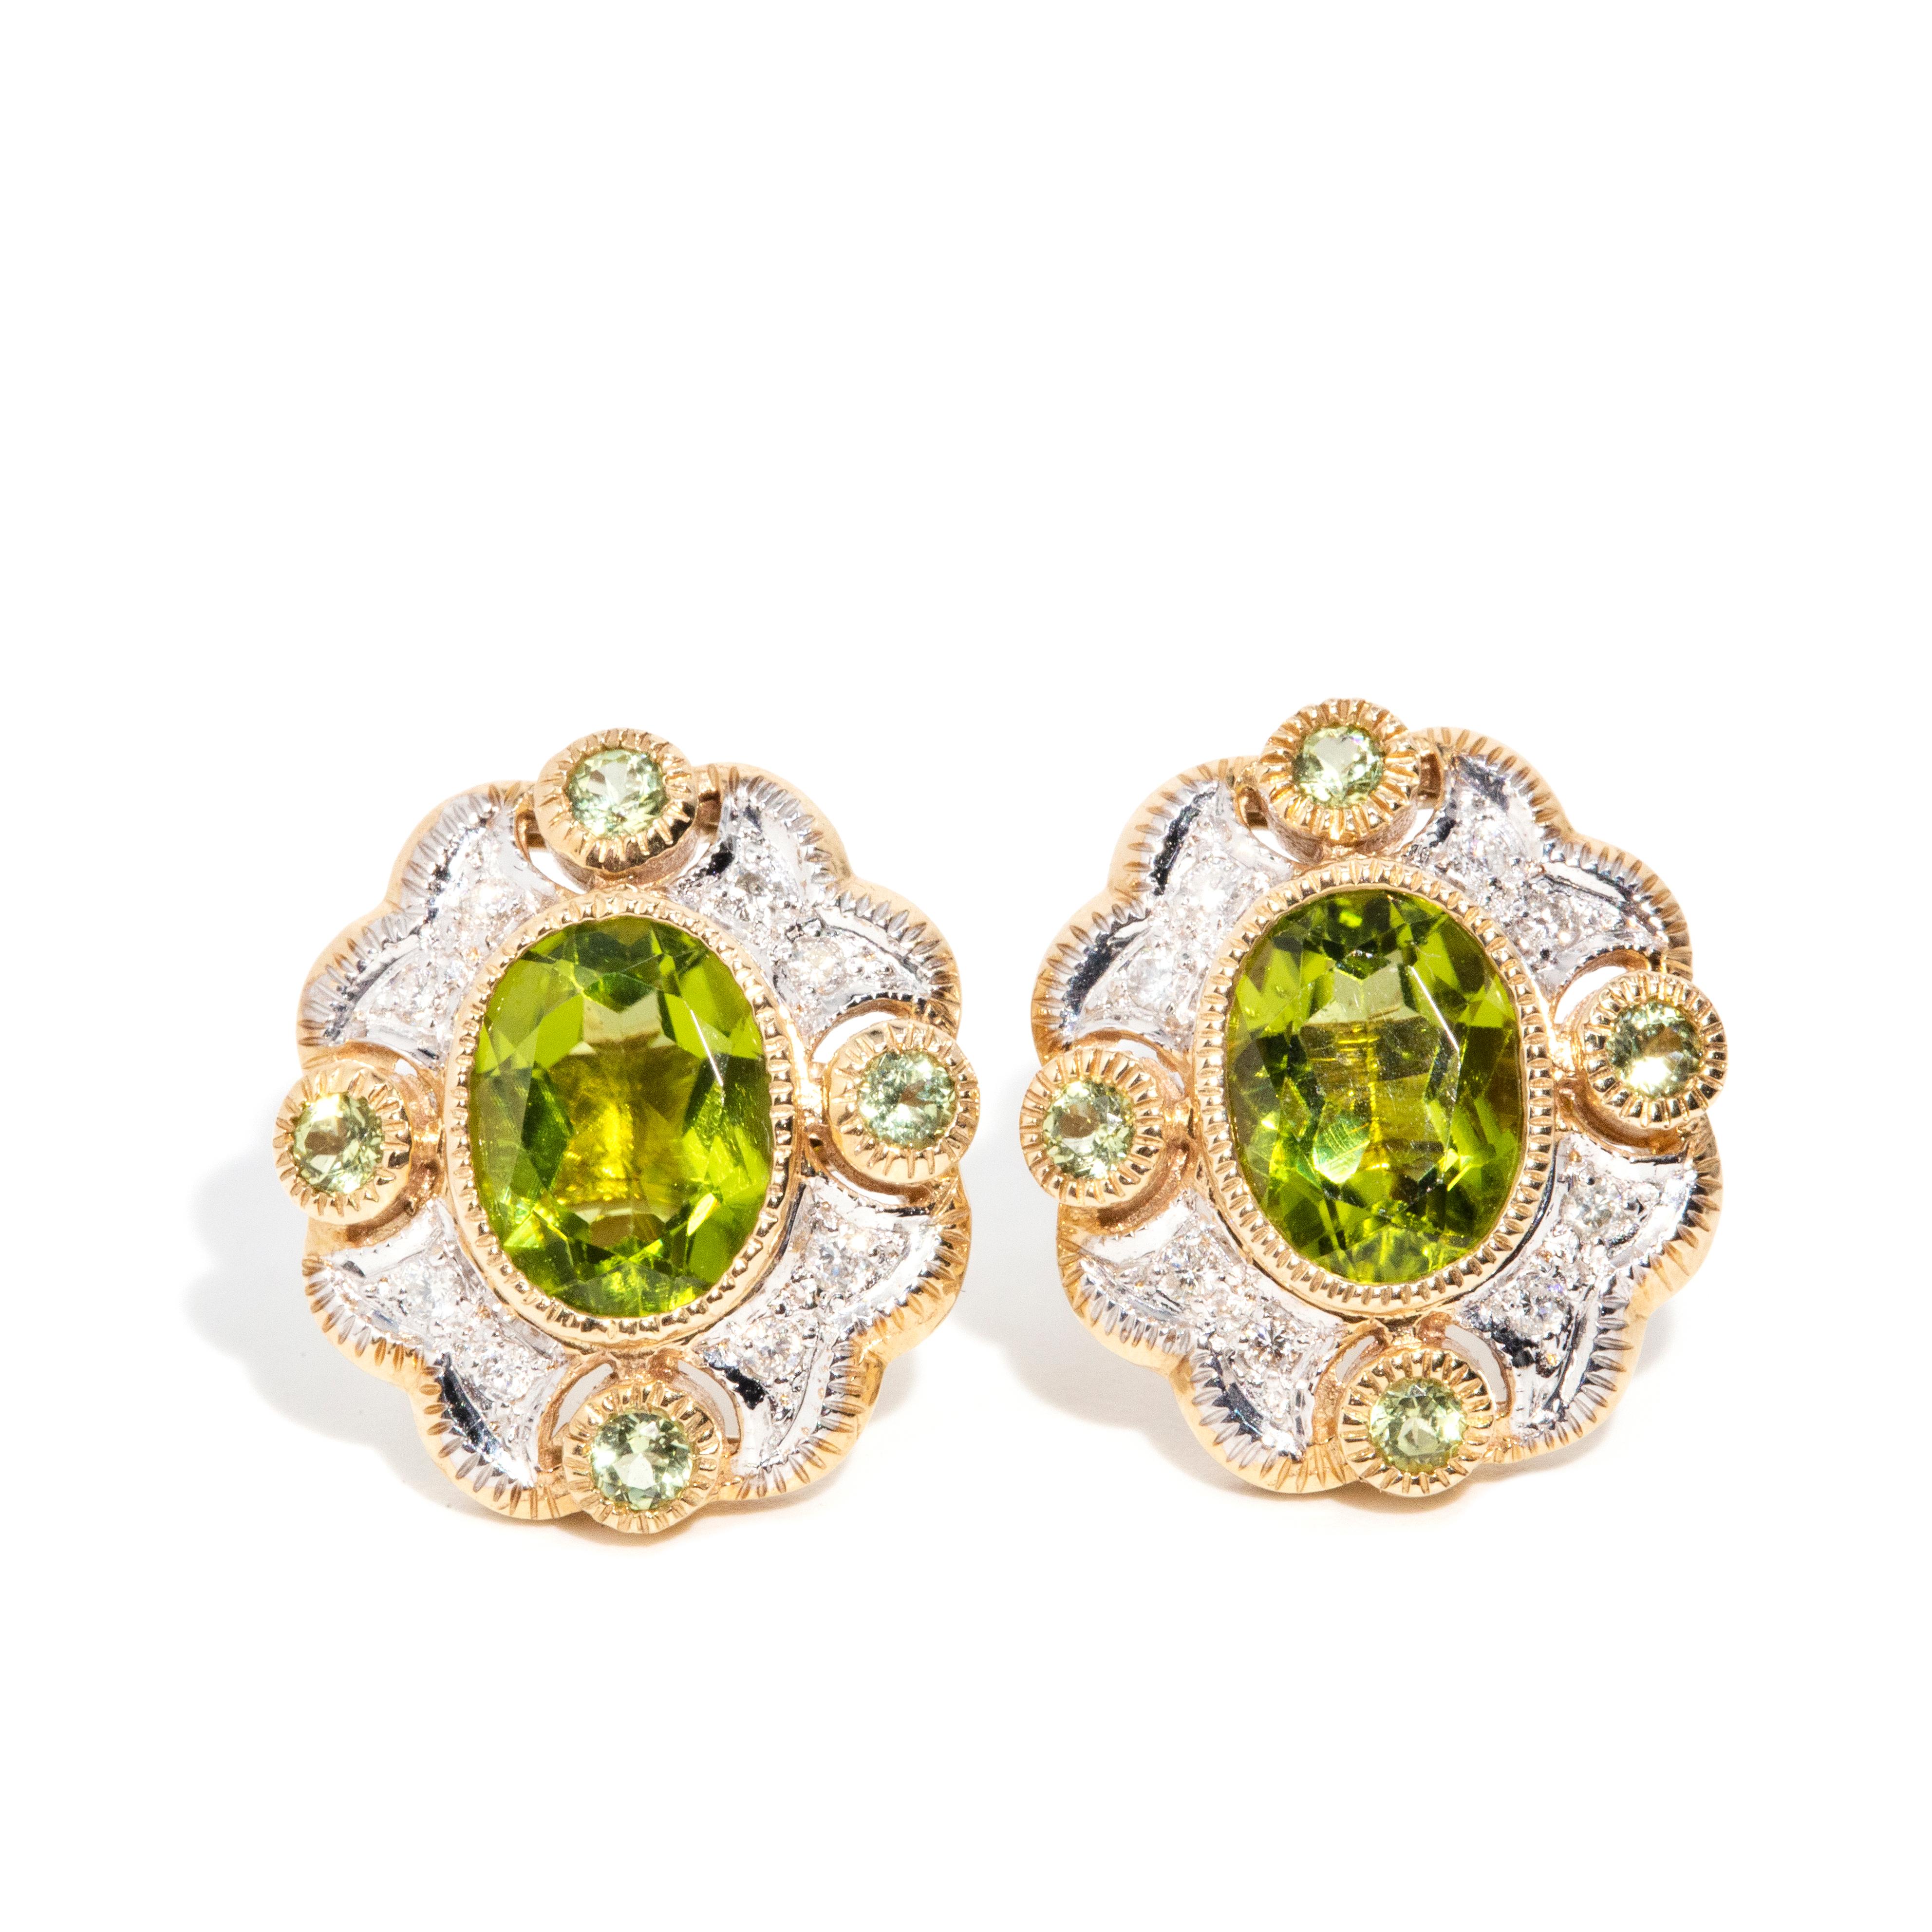 Contemporary Vintage Inspired Bright Green Peridot & Diamond Earrings 9 Carat Yellow Gold For Sale